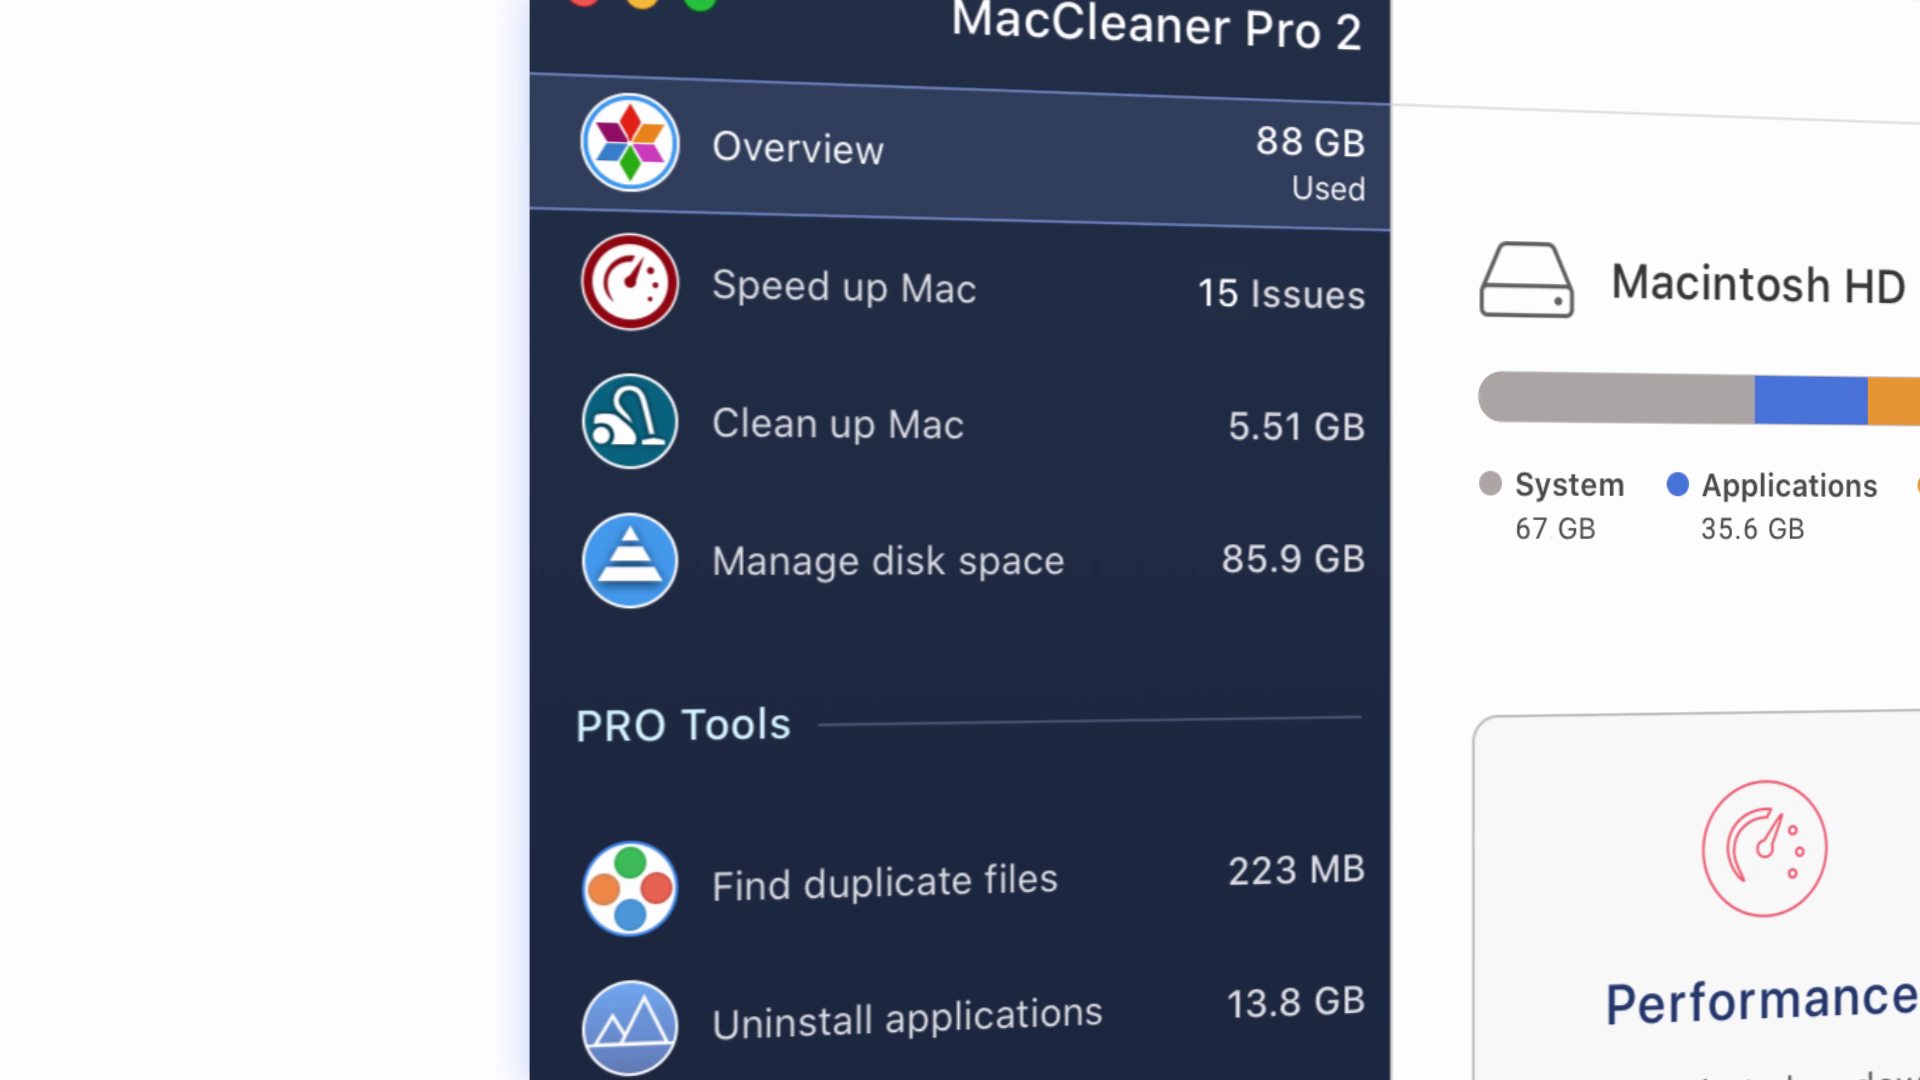 MacCleaner Pro 2 - Software Feature Video